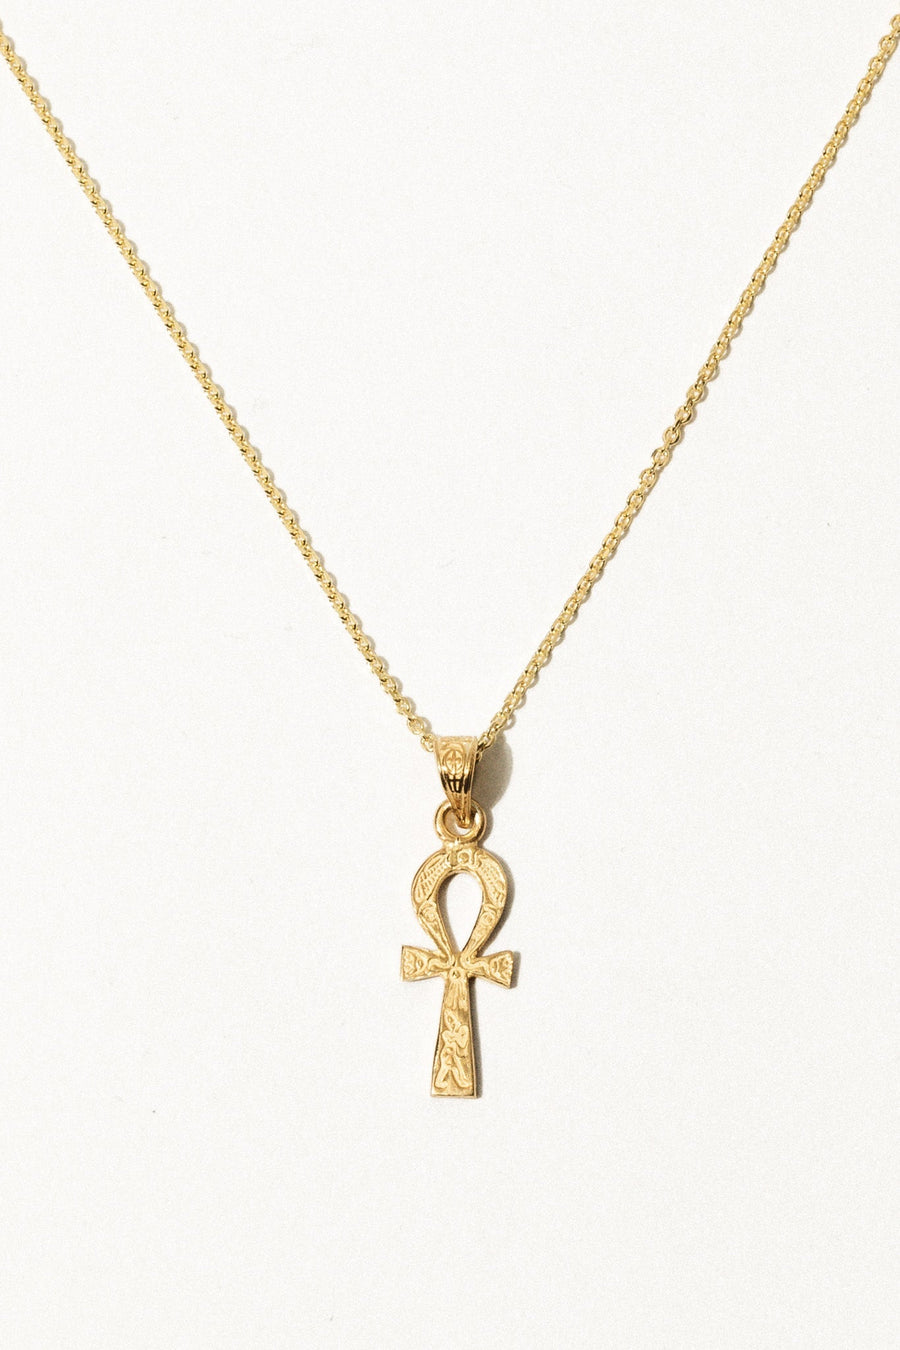 Amina Gad Jewelry Jewelry Gold / 17 Inches Great Ankh of Ra Necklace